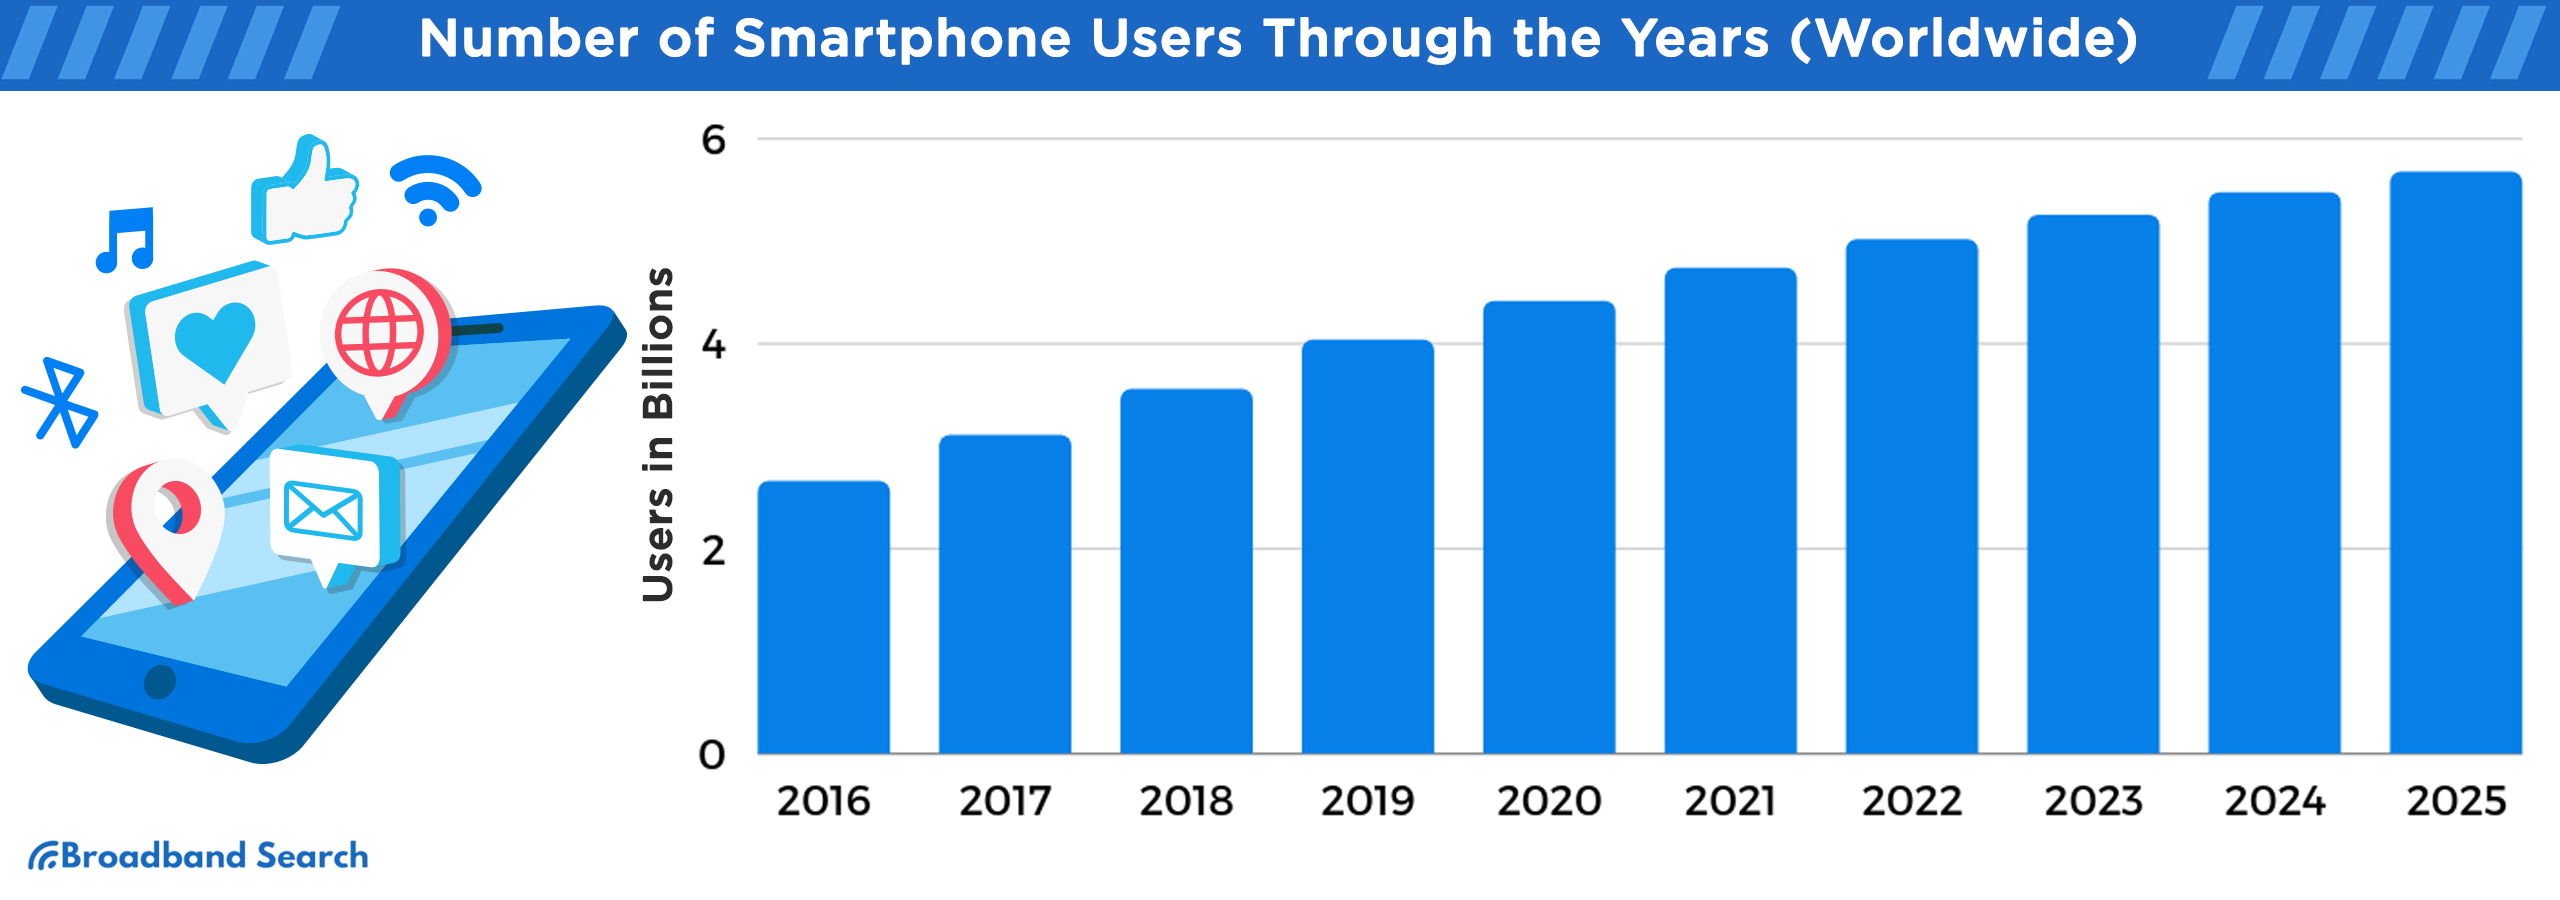 Number of Smartphone users through the years worldwide